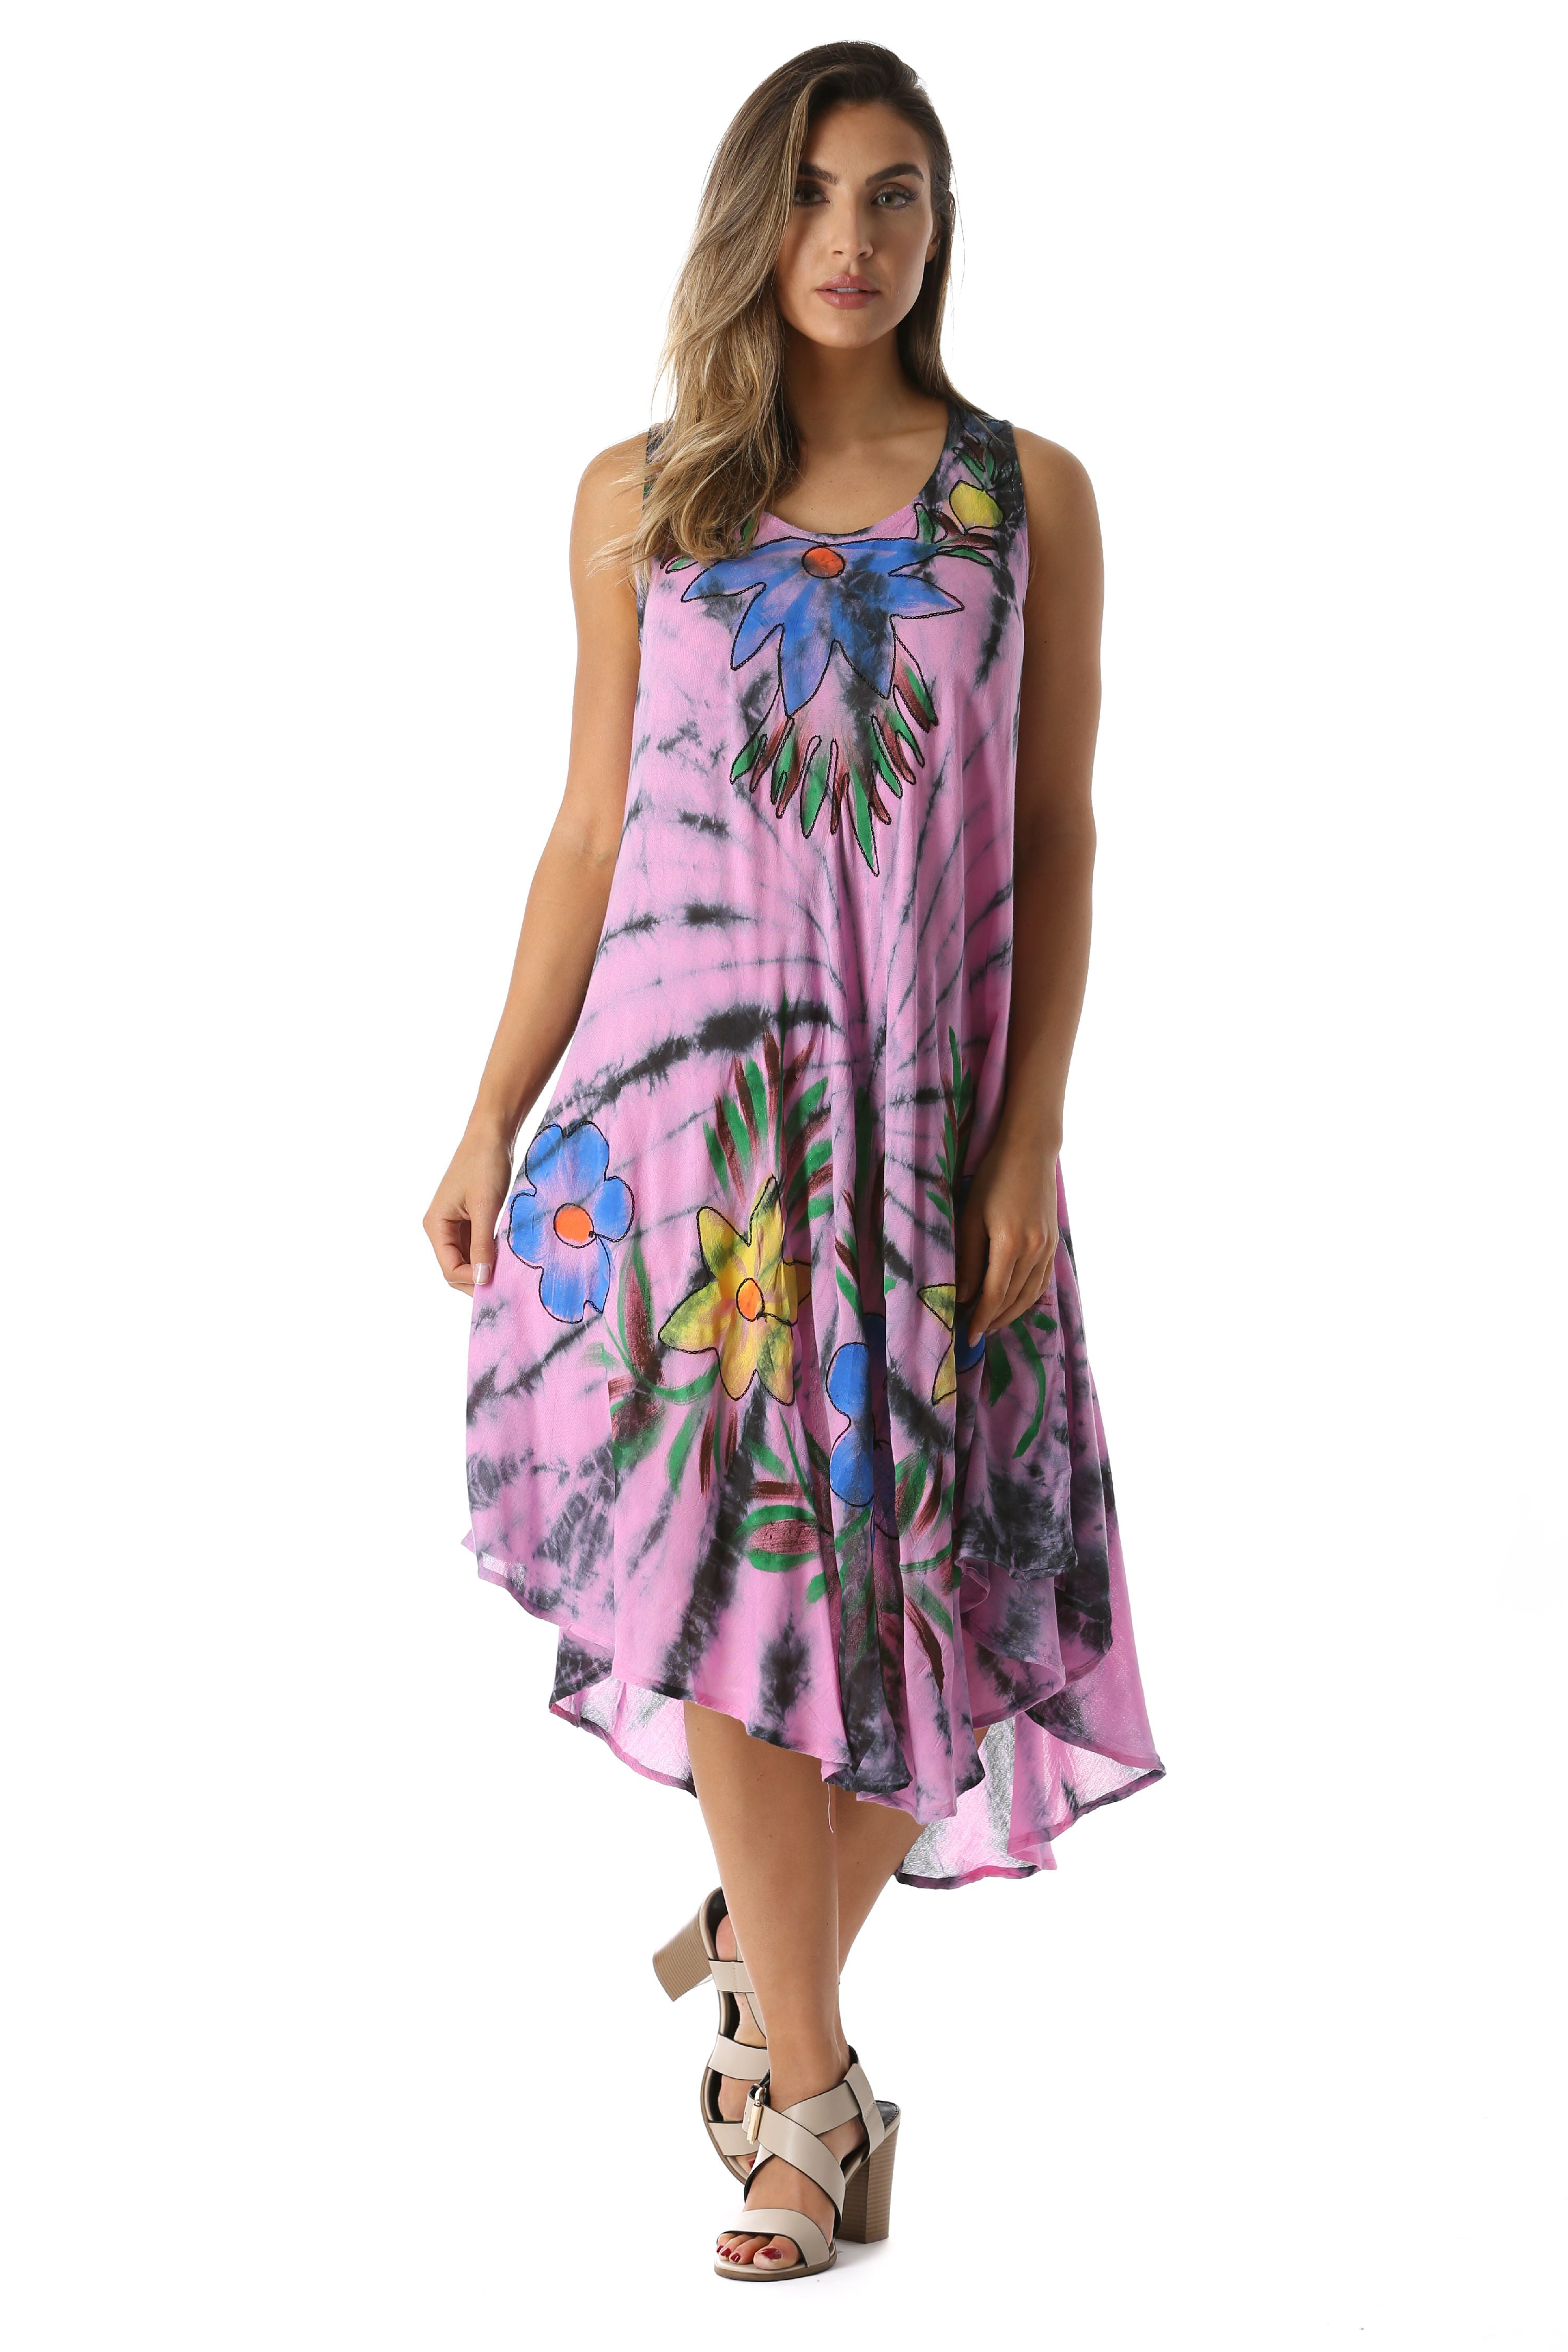 Riviera Sun - Riviera Sun Tie Dye Summer Dress with Floral Hand Painted ...